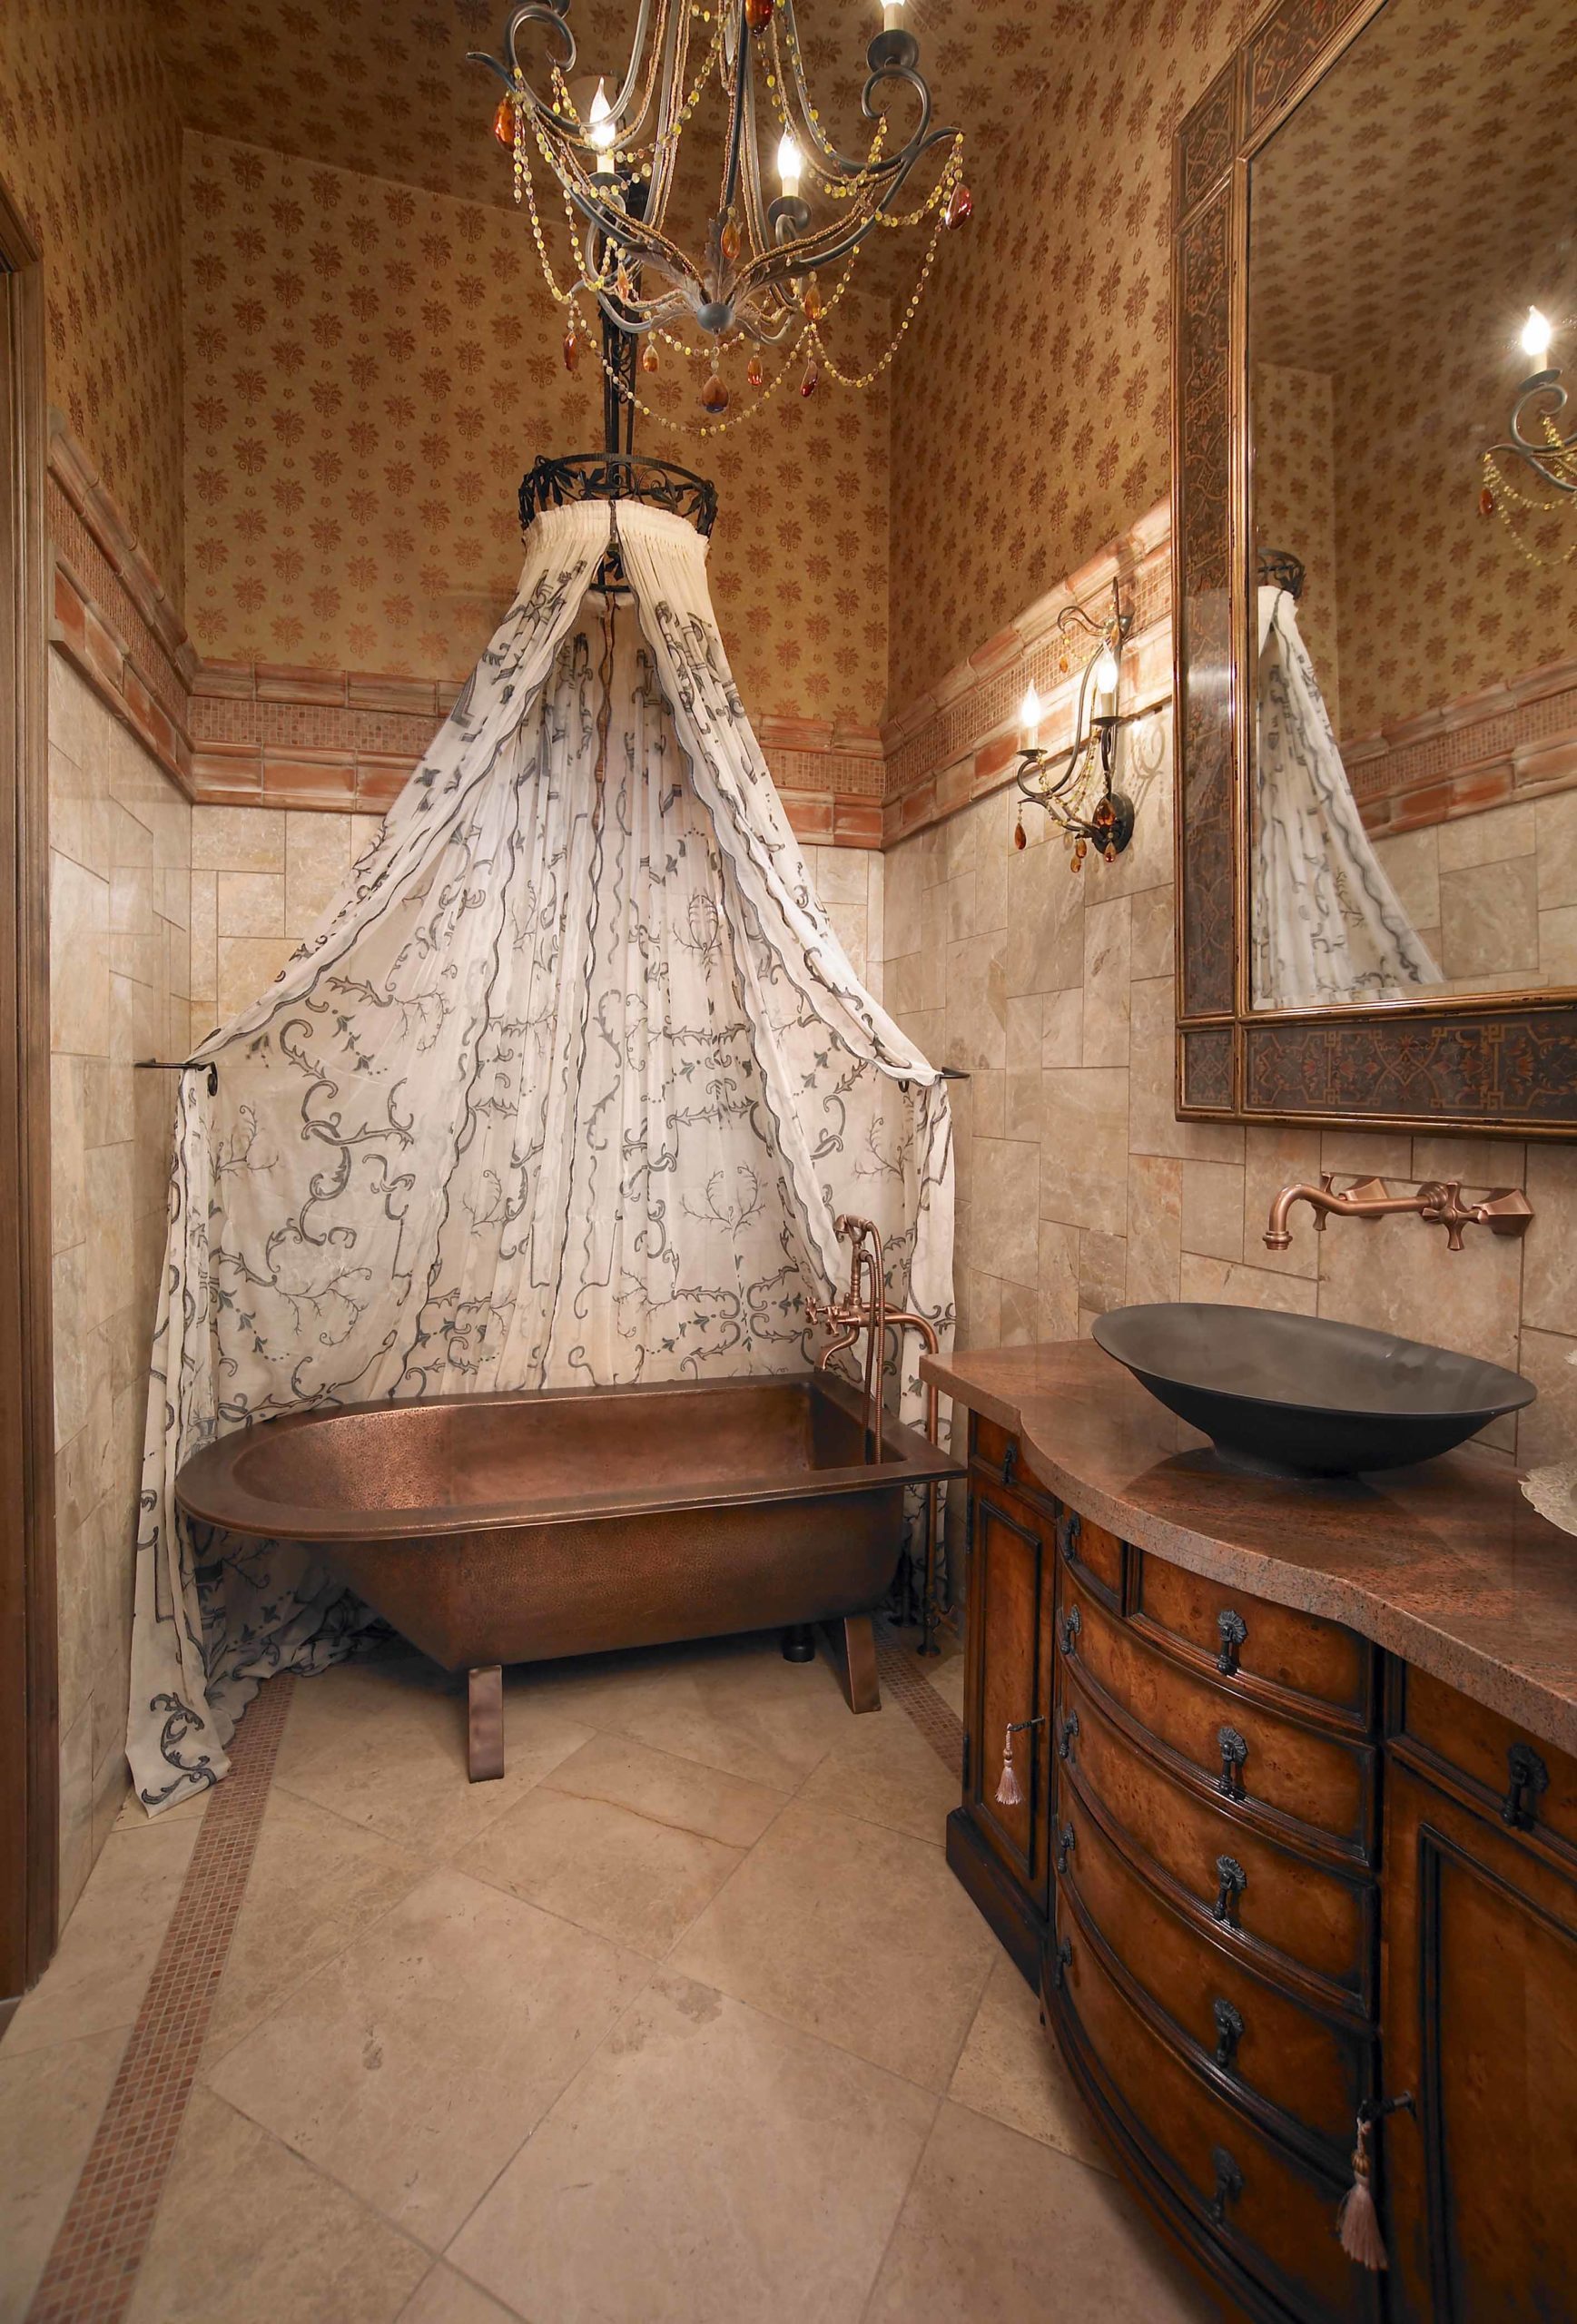 Bathroom with tiled floors and walls and patterned wallpaper and a circular shower curtain hanging above tub